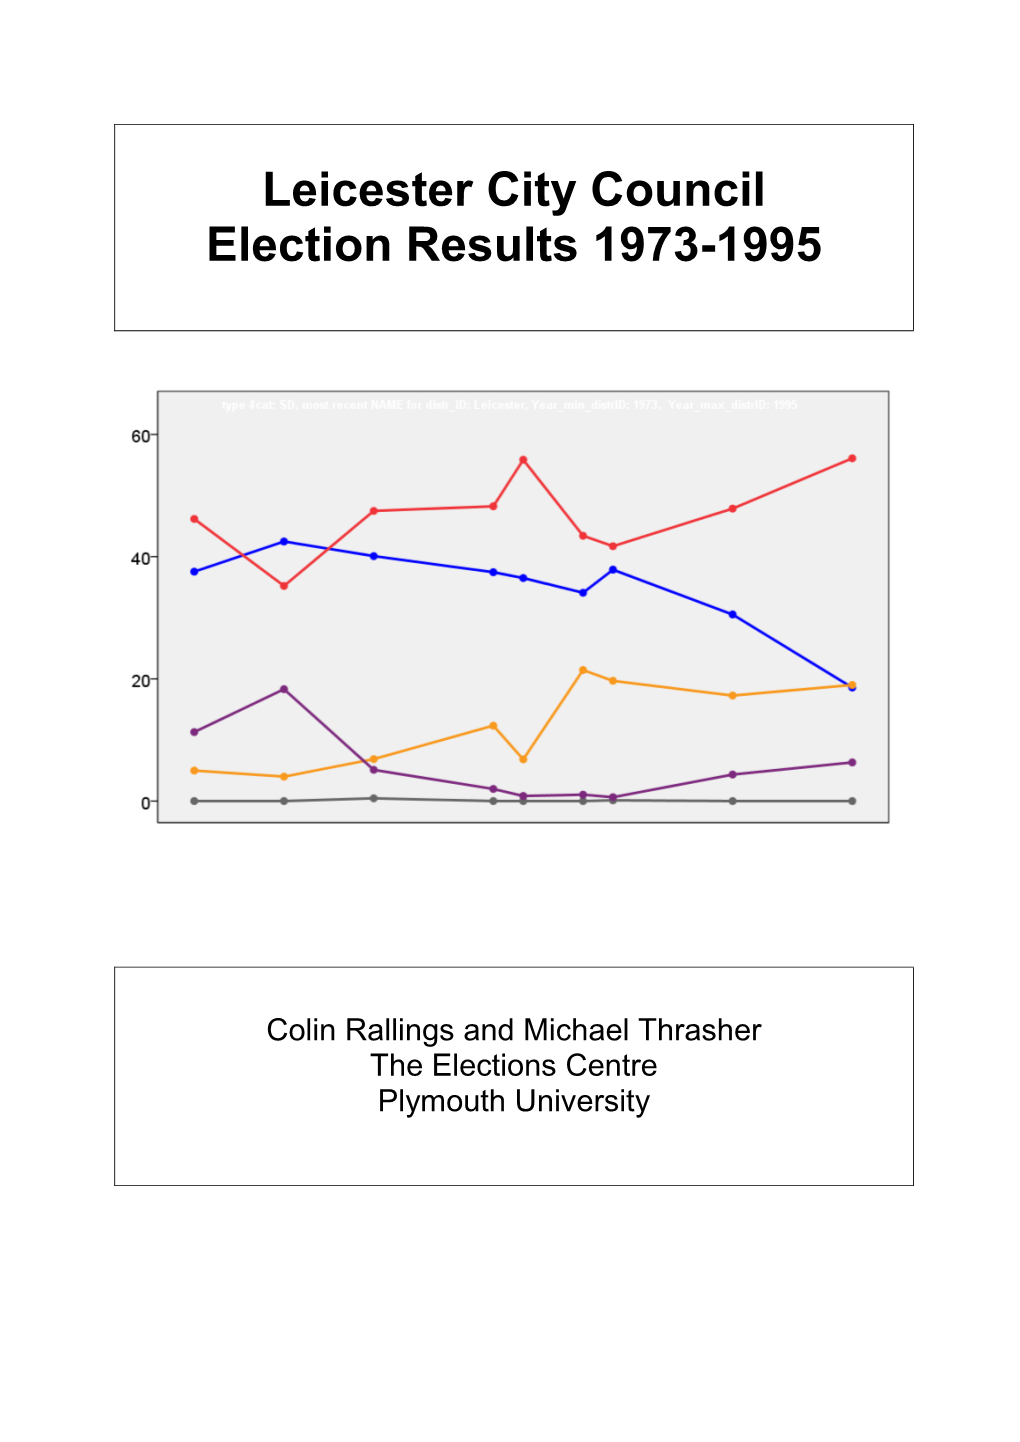 Leicester City Council Election Results 1973-1995